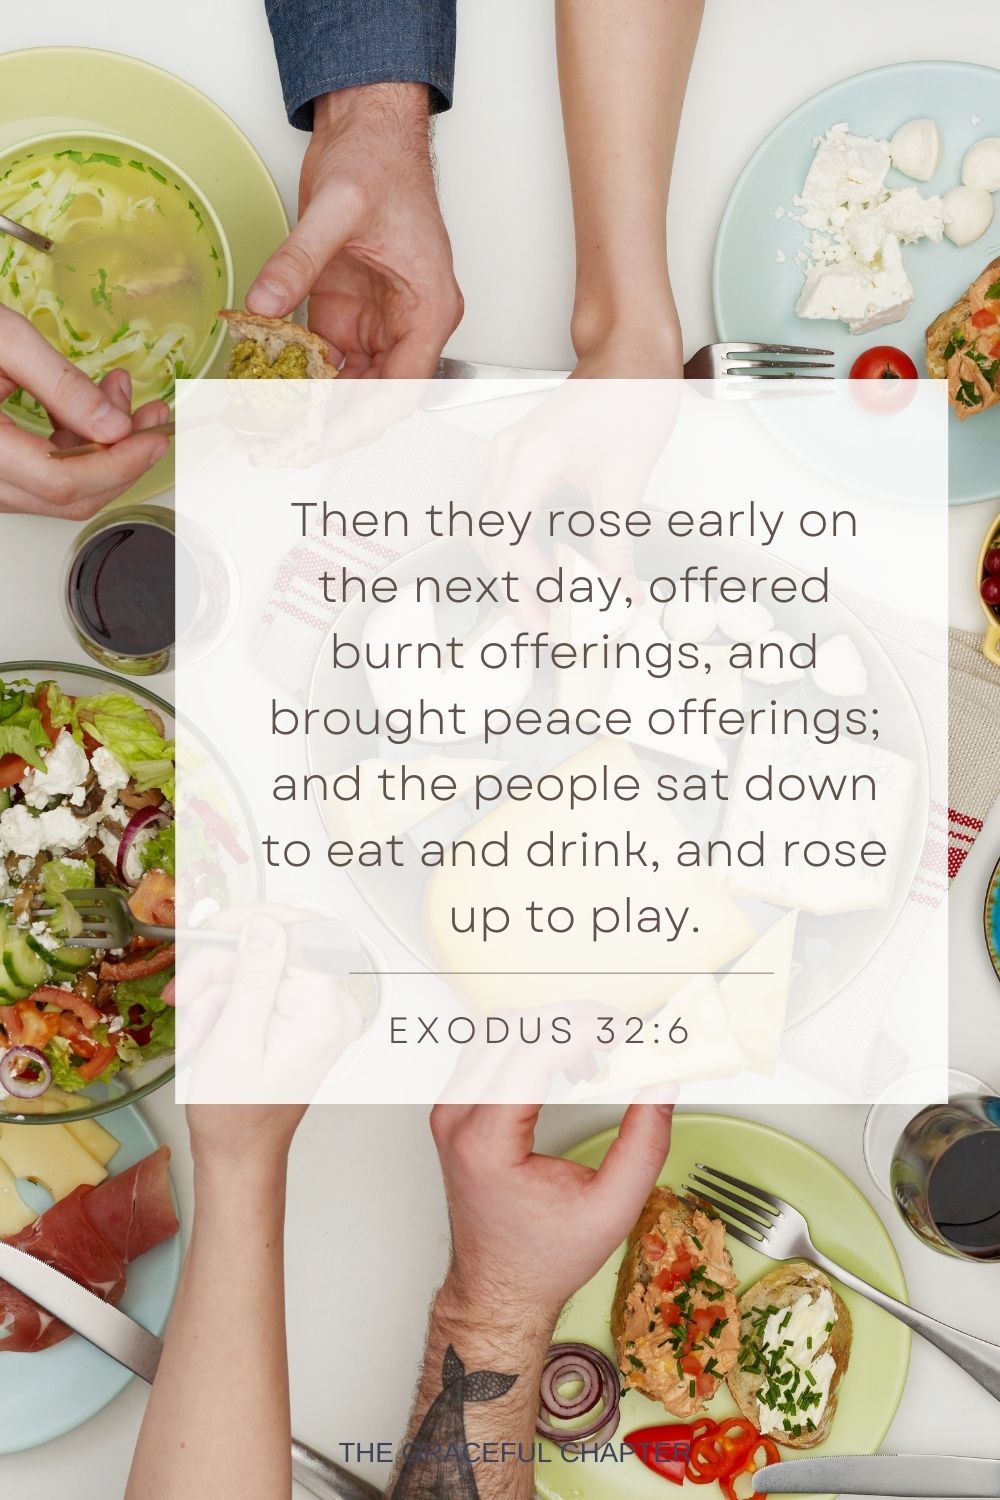 Then they rose early on the next day, offered burnt offerings, and brought peace offerings; and the people sat down to eat and drink, and rose up to play. Exodus 32:6